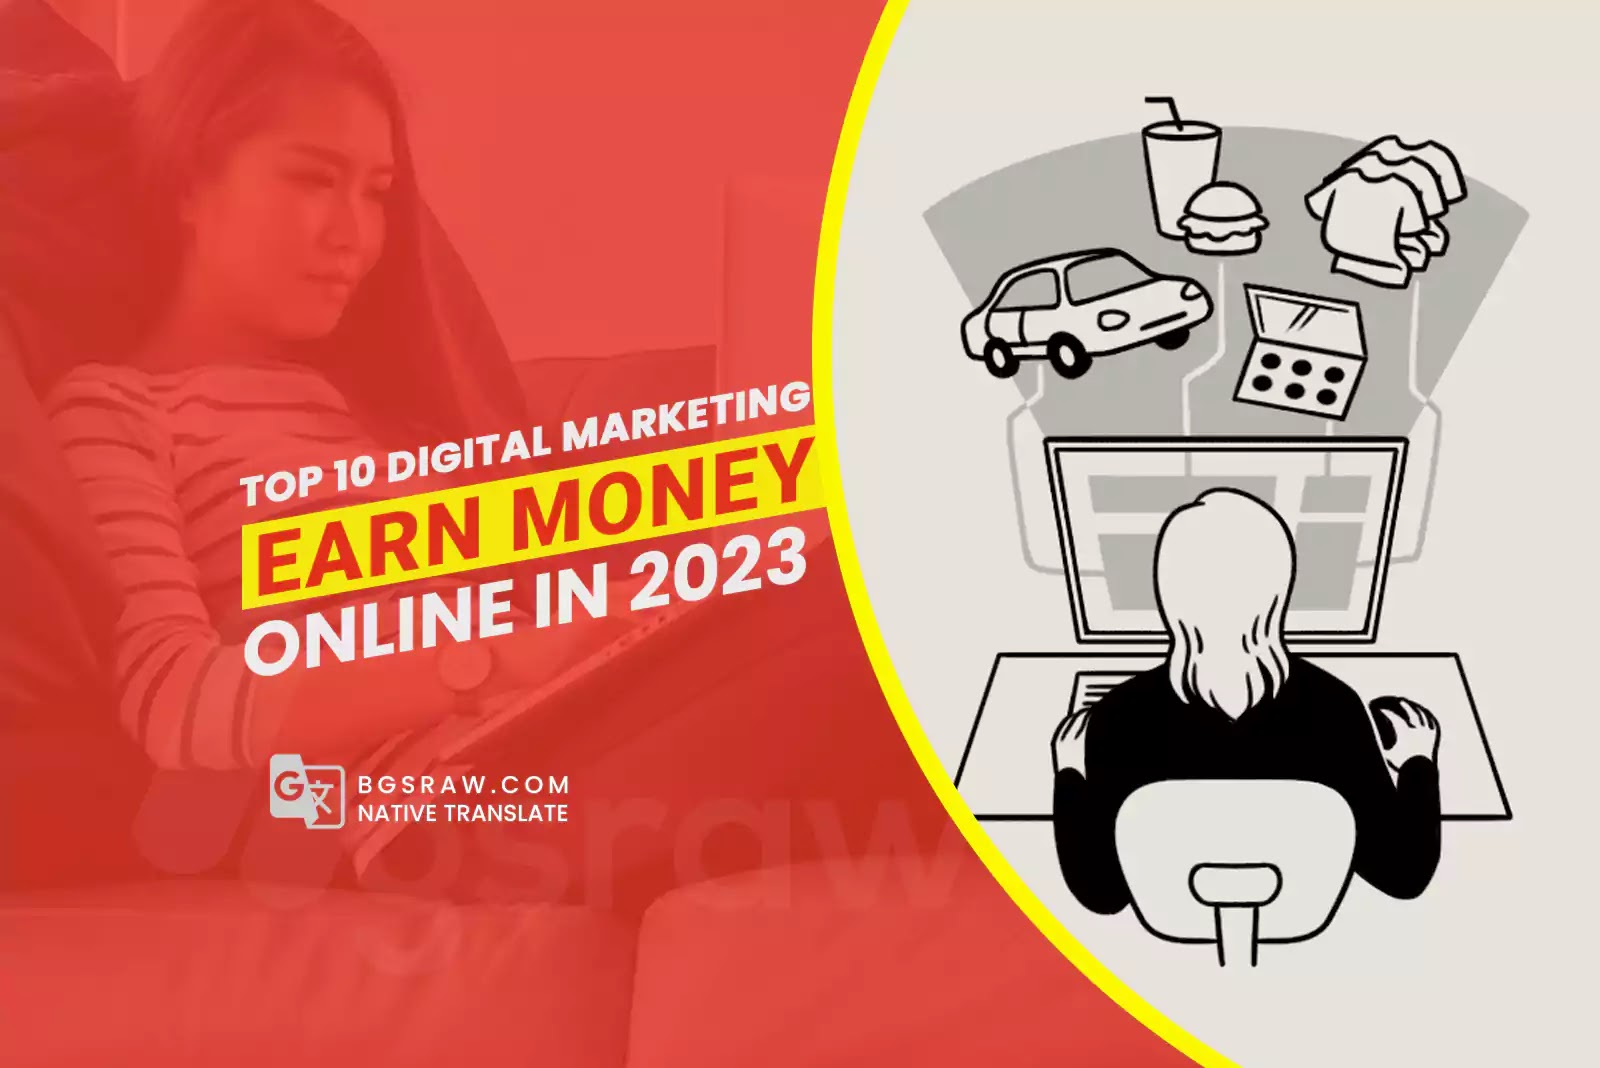 Top 10 Digital marketing services to earn money online in 2023